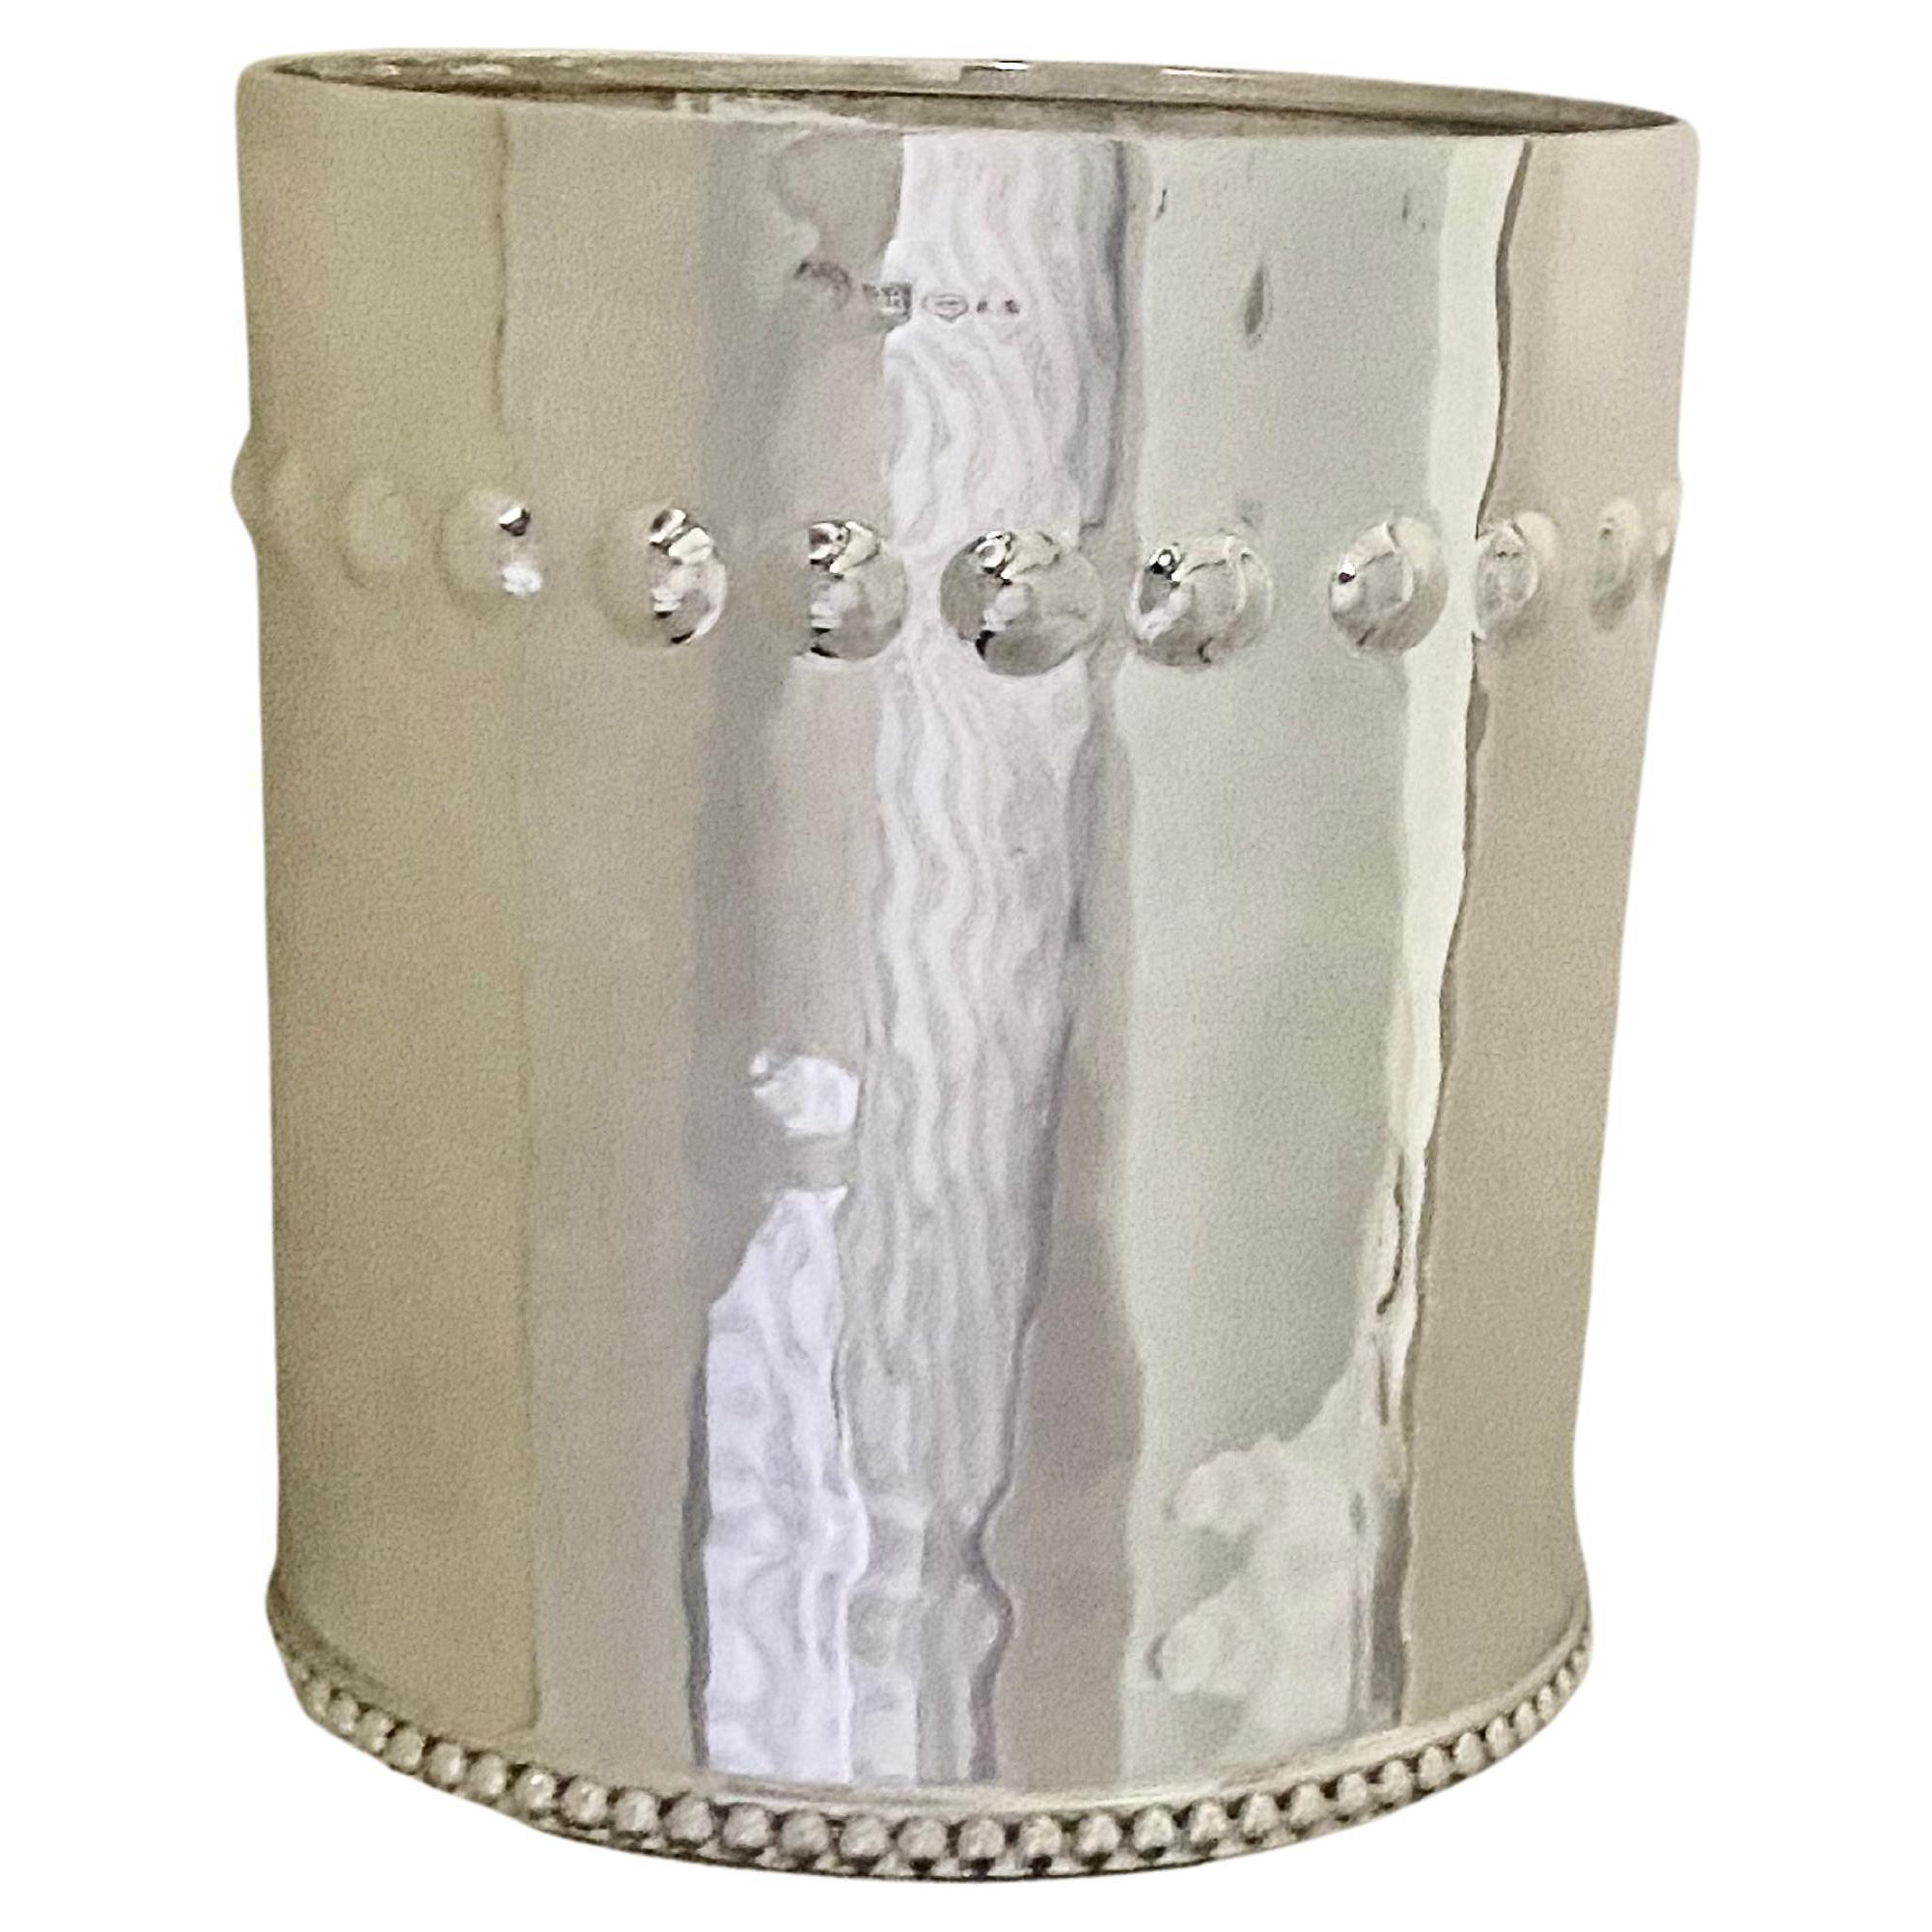 A Brandimarte Florence Ice Collection
A high quality Hand hammered Champagne bucket in solid 800 grade silver
The entire surface is hand wrought and looks amazing.
Mid-century Italian design diameter 19cm height 21cm
Large heavy Bucket weighing